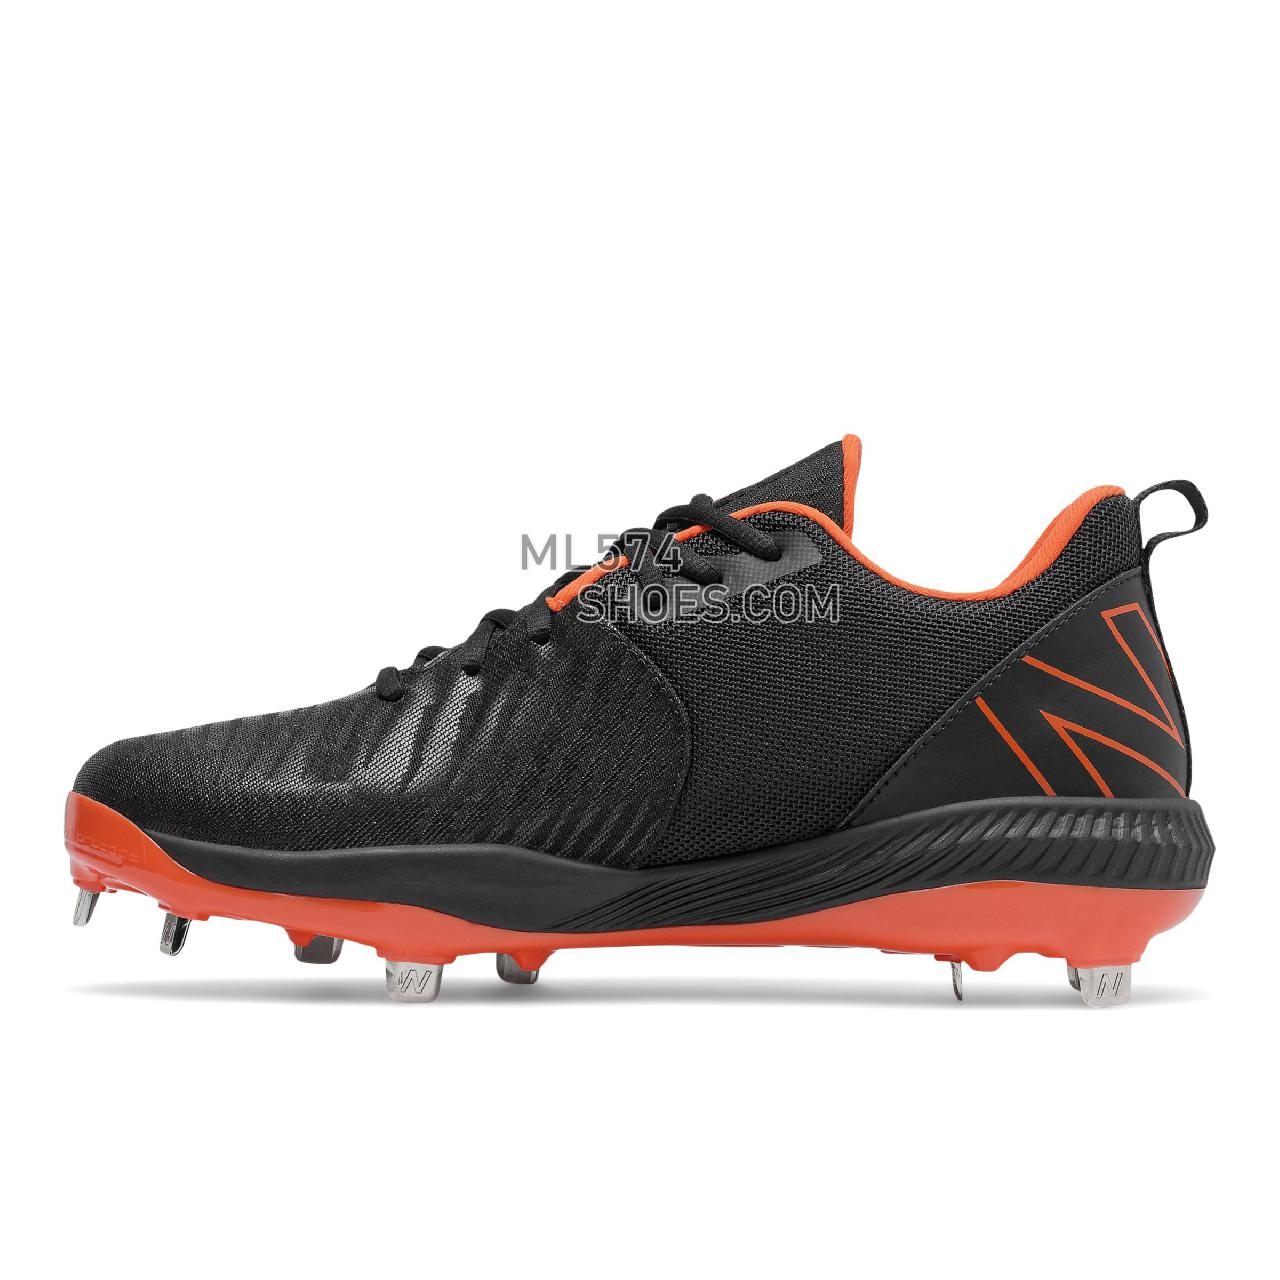 New Balance FuelCell 4040 v6 Metal - Men's Mid-Cut Baseball Cleats - Black with Orange - L4040BO6